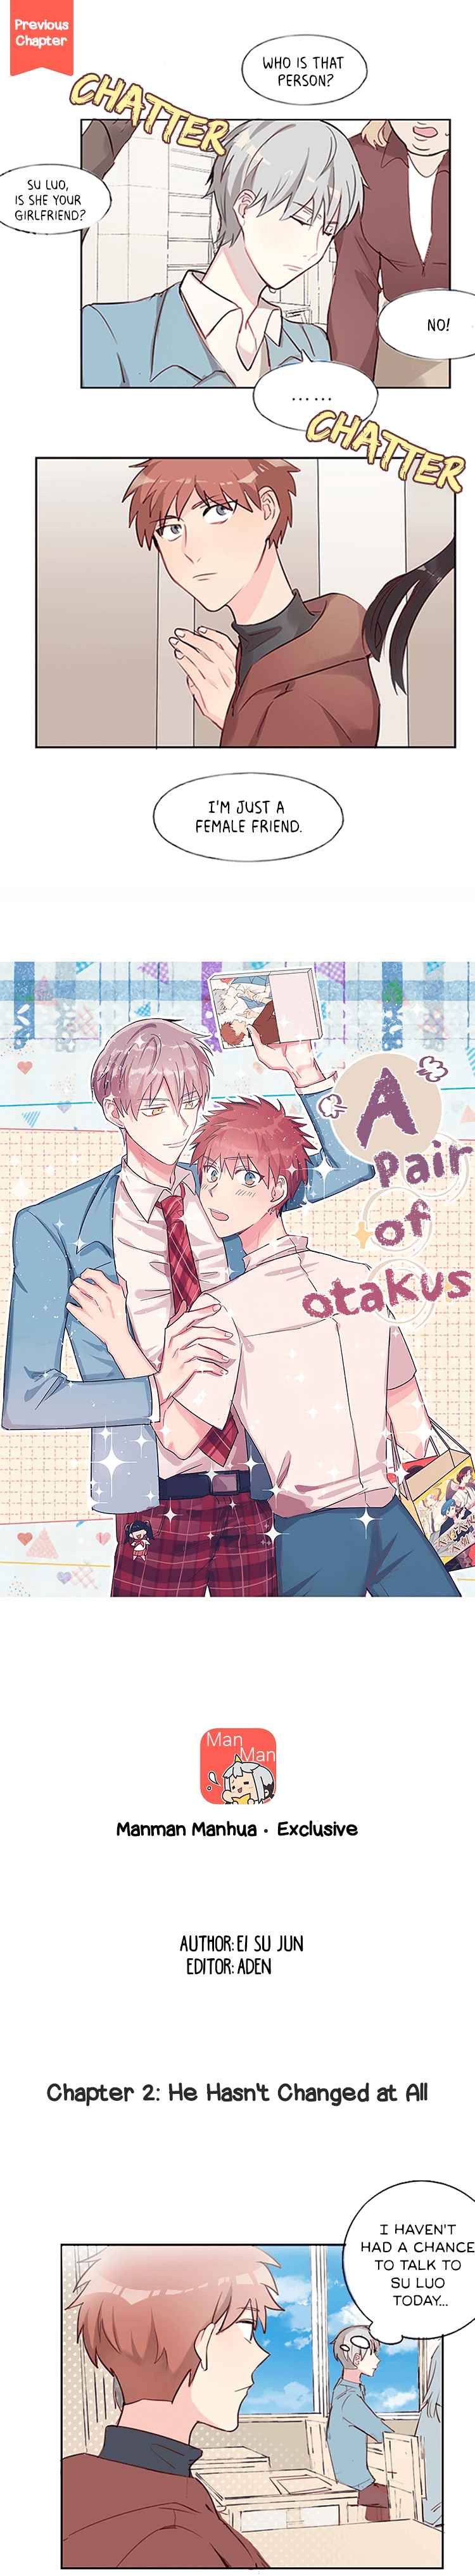 A Pair of Otakus Ch. 2 He hasn't changed at all